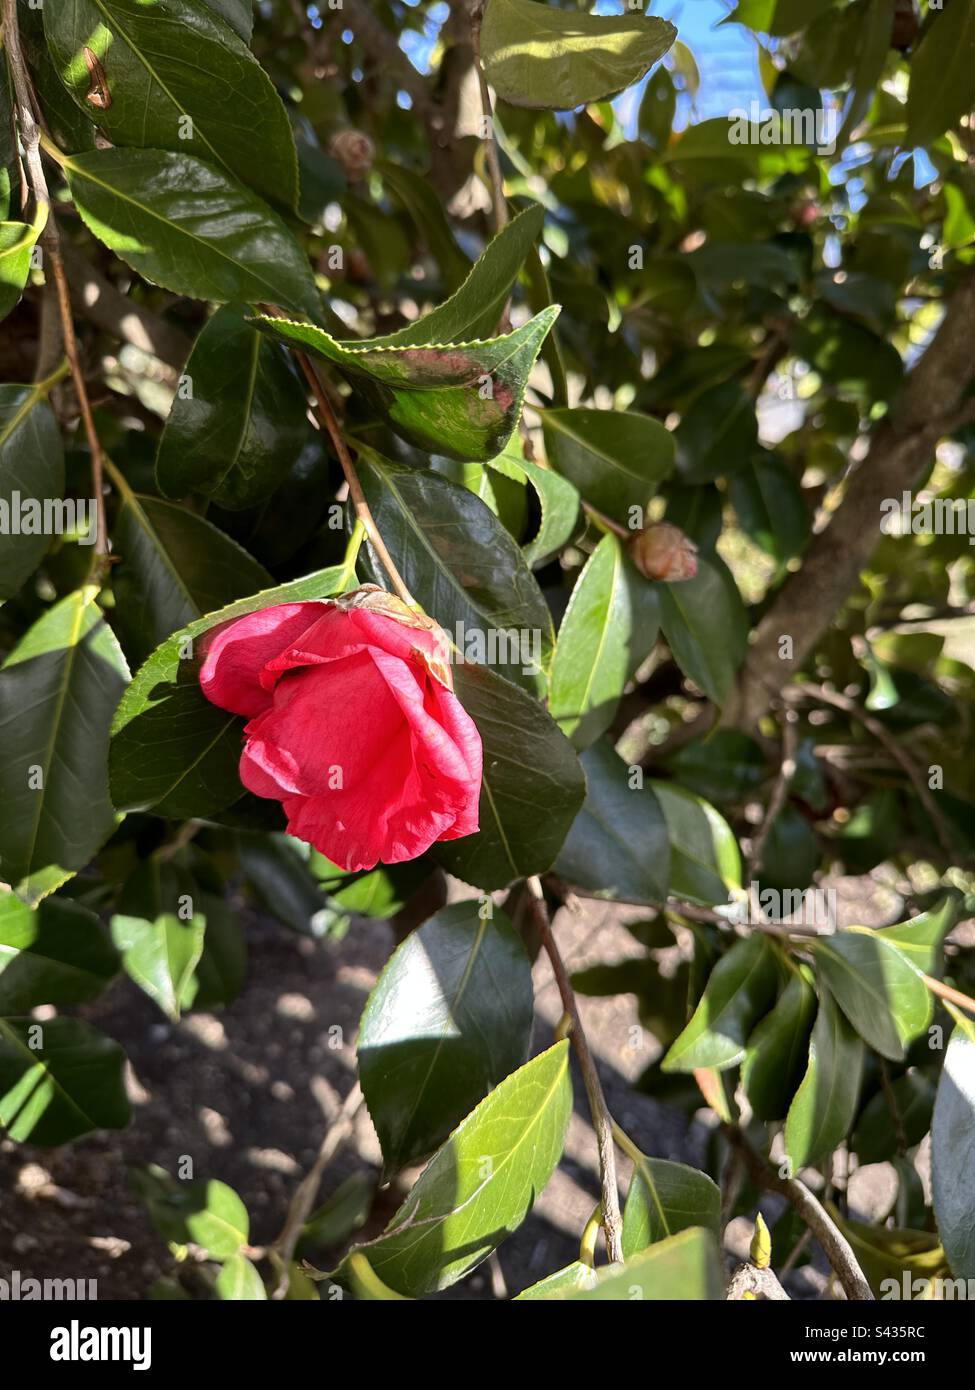 One of the first flowers of the season, a beautiful camellia. Stock Photo